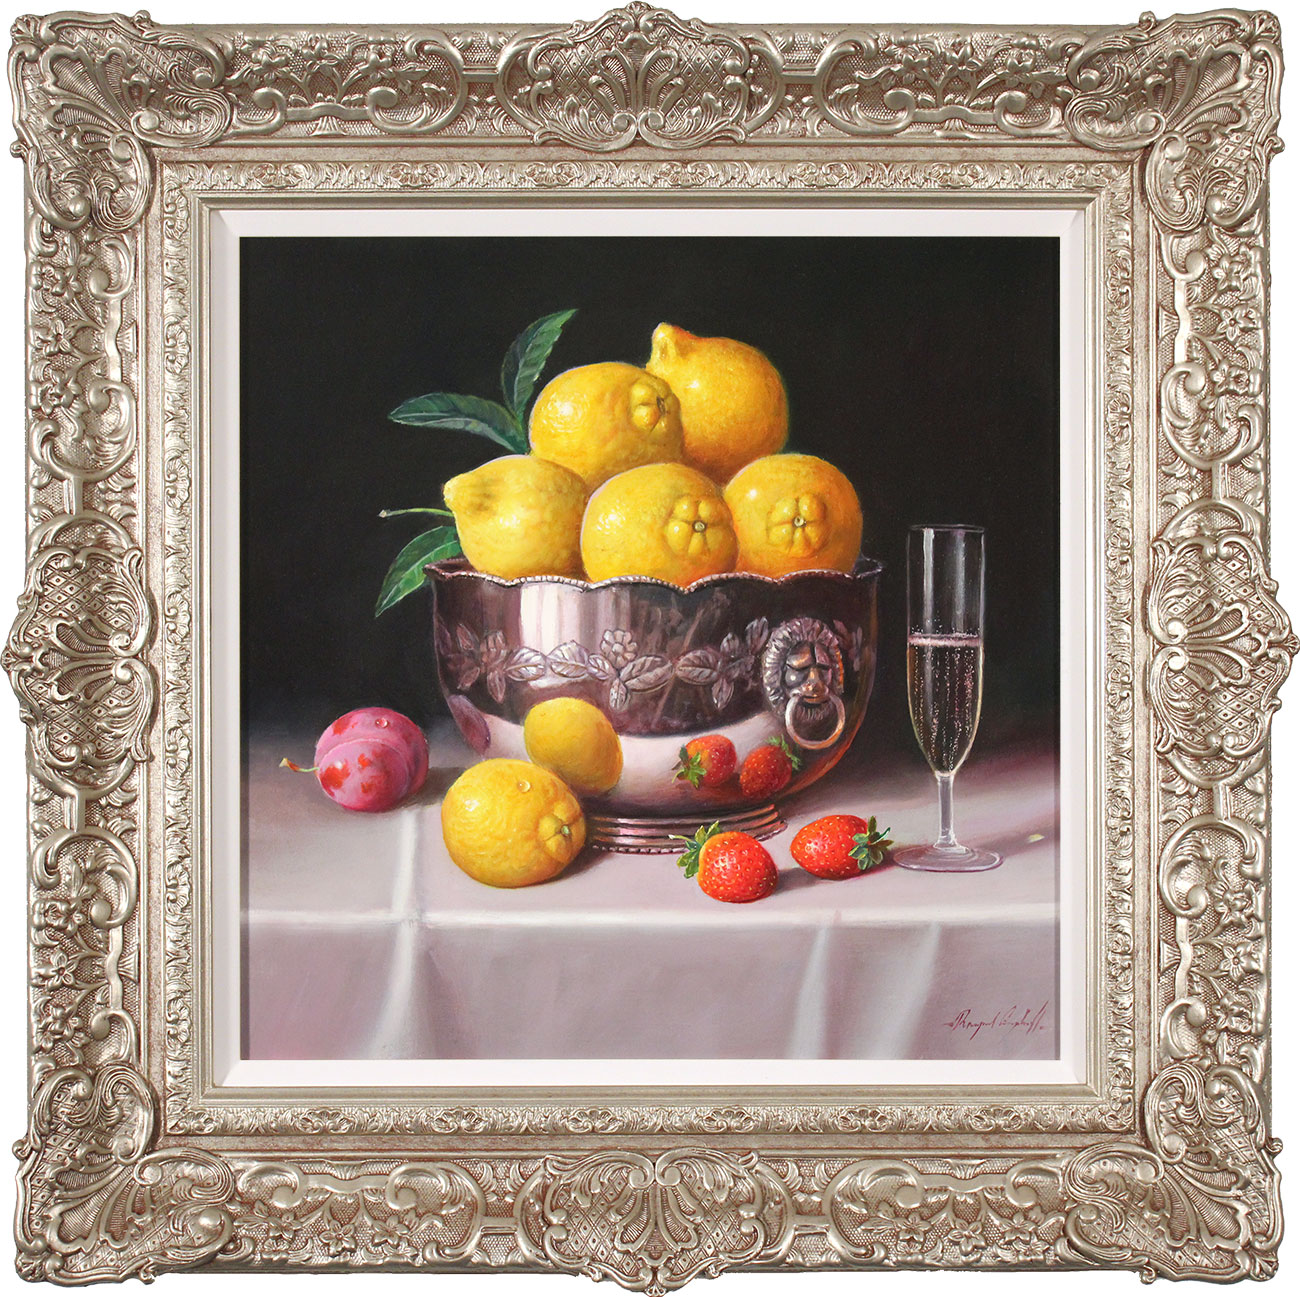 Raymond Campbell, Original oil painting on panel, Bowl of Lemons Click to enlarge